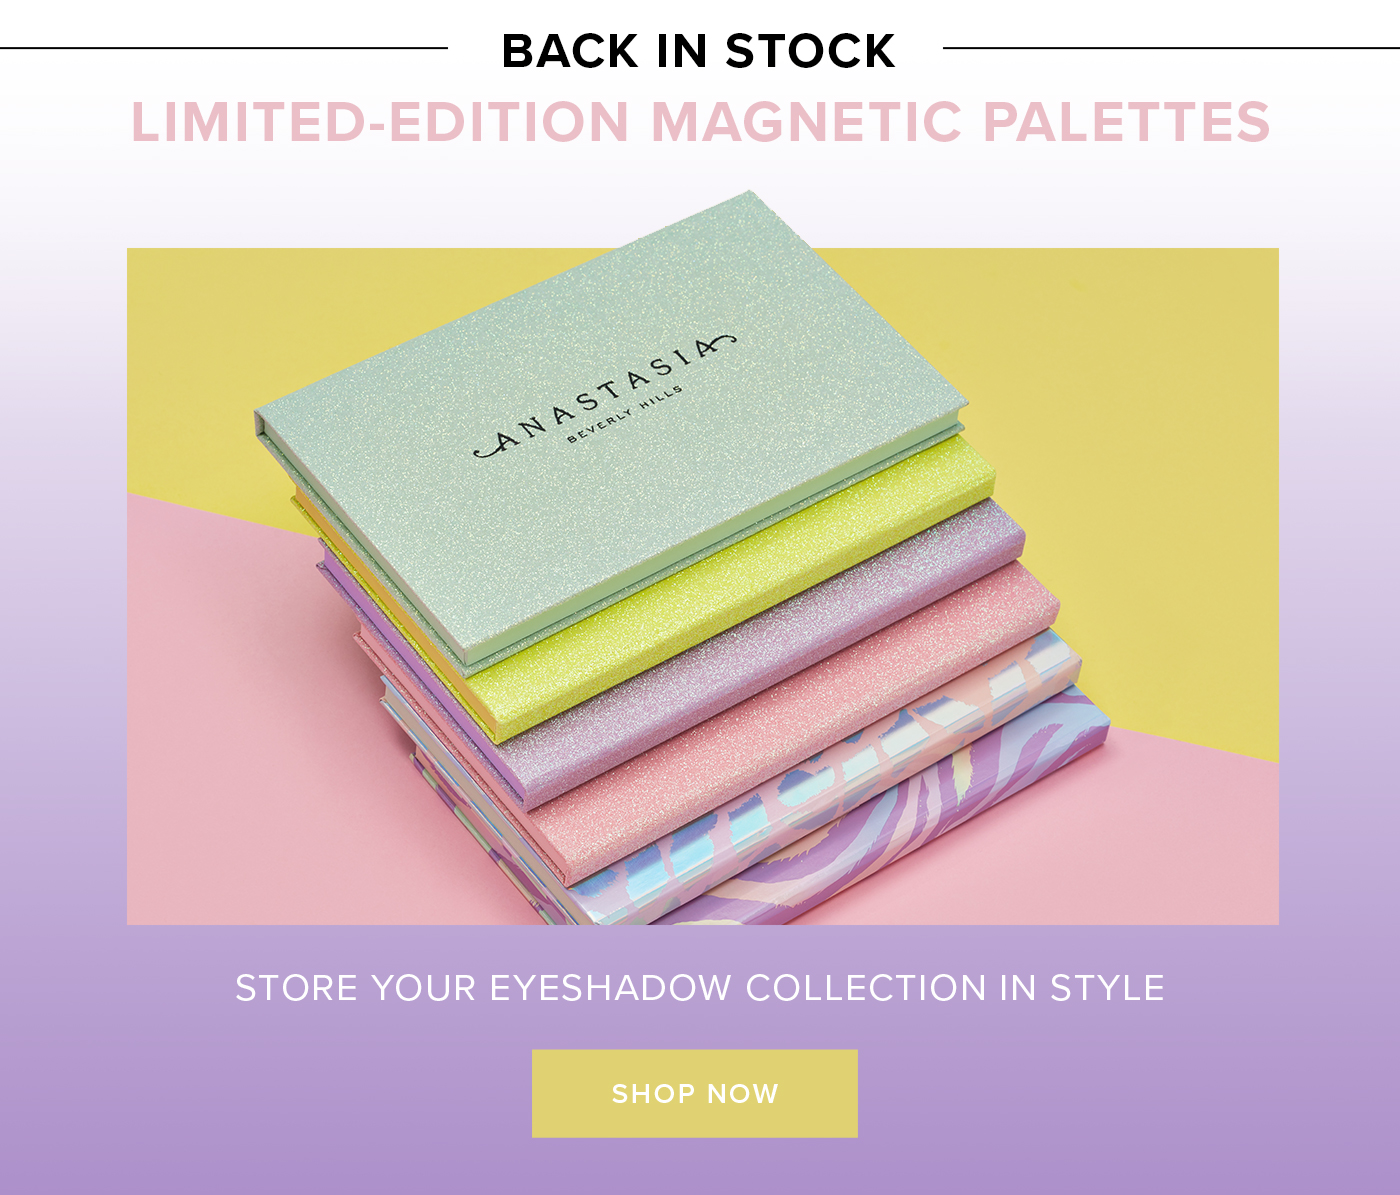 BACK IN STOCK LIMITED-EDITION MAGNETIC PALETTES. SHOP NOW